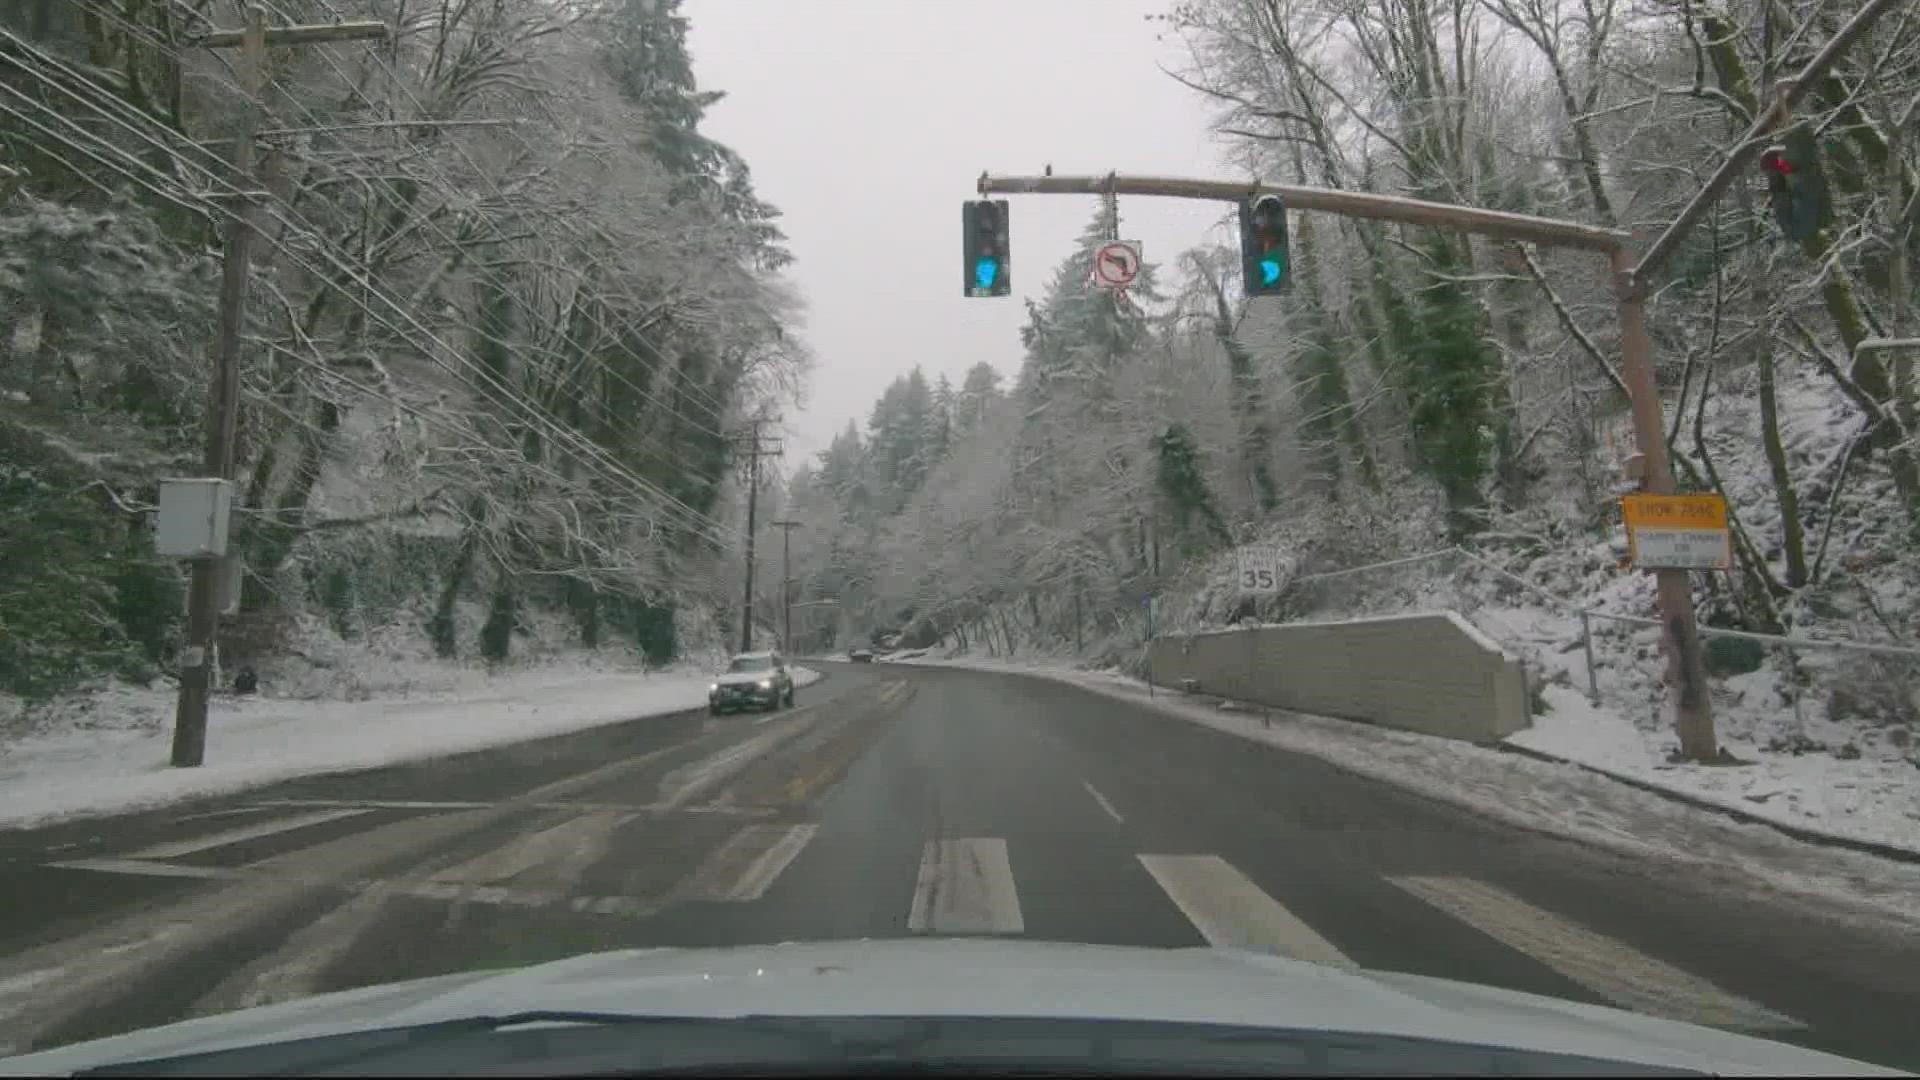 KGW's Art Edwards found the roads around Portland that fared the worst in the snow.